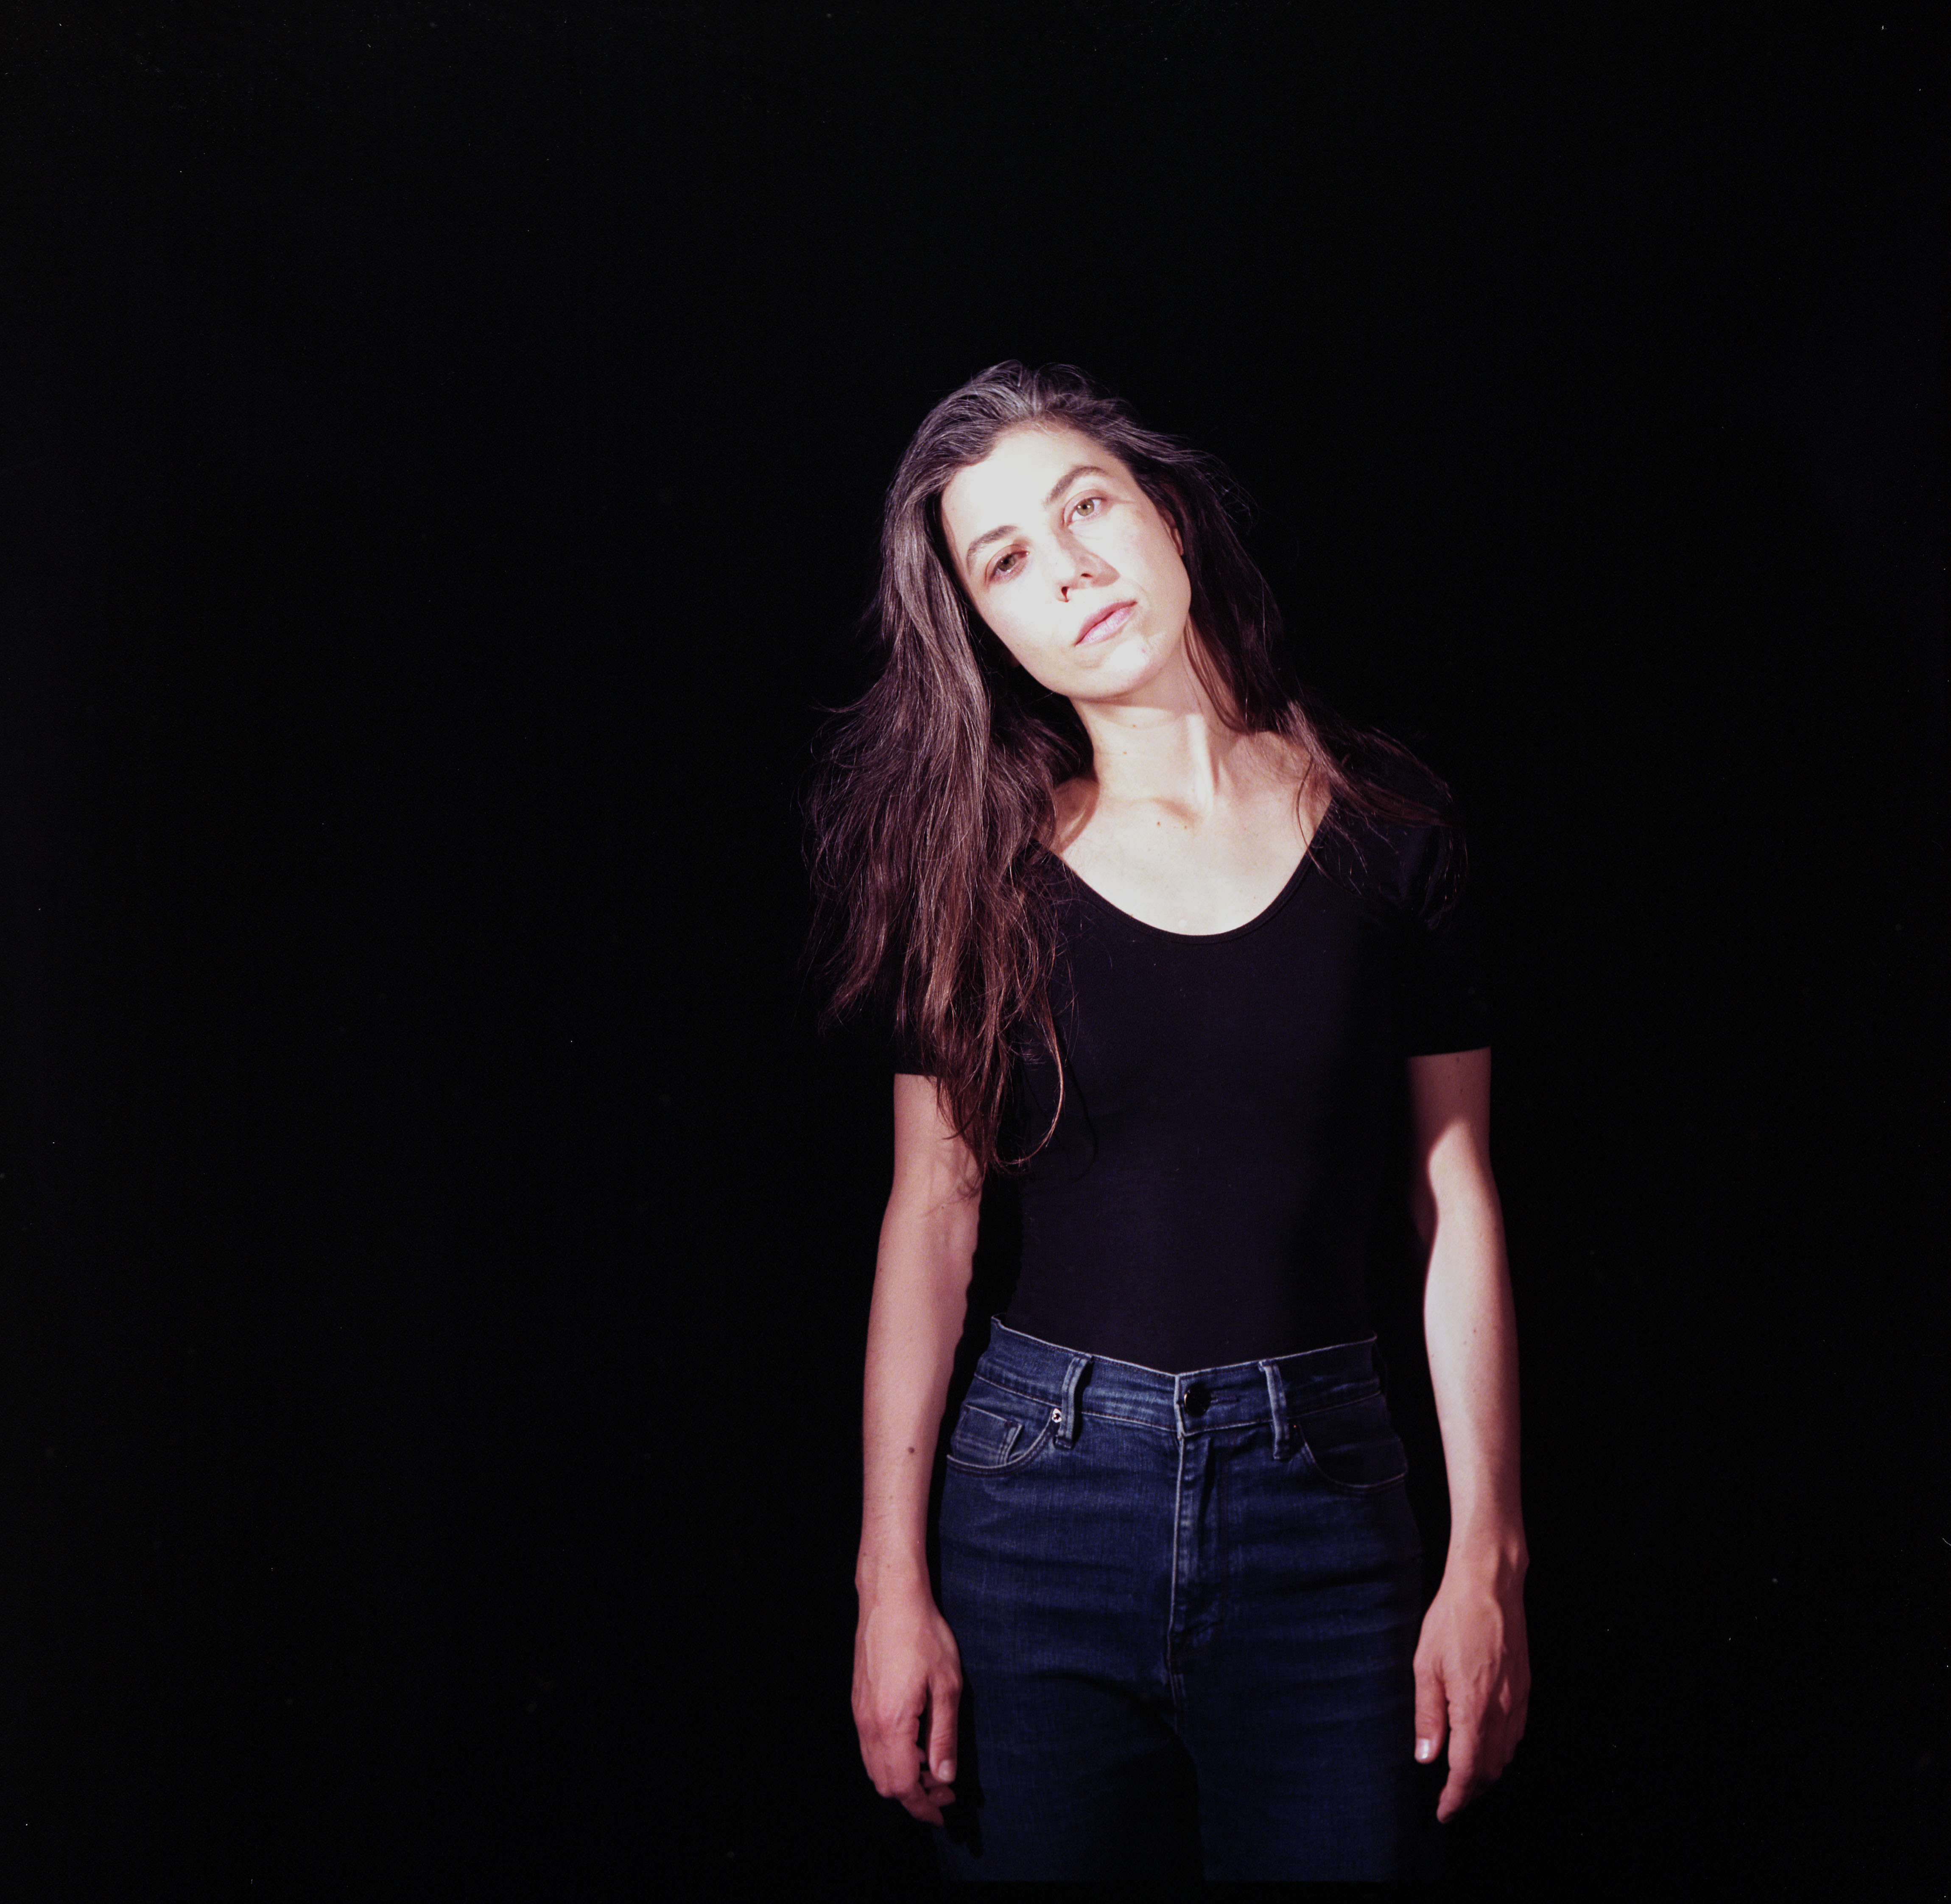 julia holter announces album and tour, releases "I Shall Love 2"